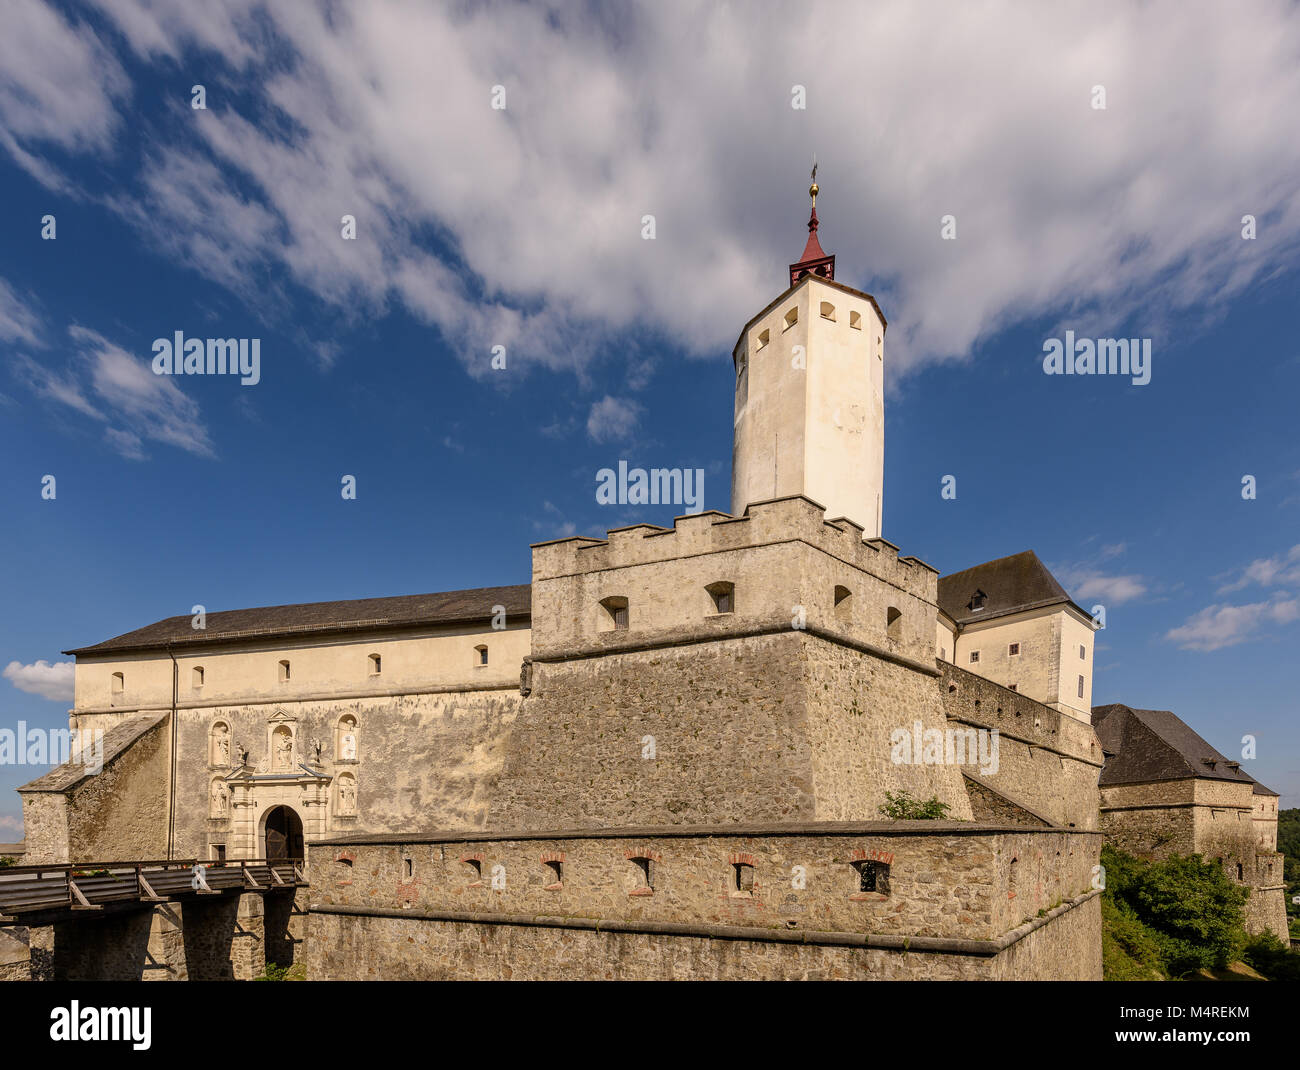 Color outdoor architecture photo of the mdeieval fortress Forchtenstein, Burgenland, Austria. with moat,tower,bridge,sunny day,blue sky, some clouds Stock Photo